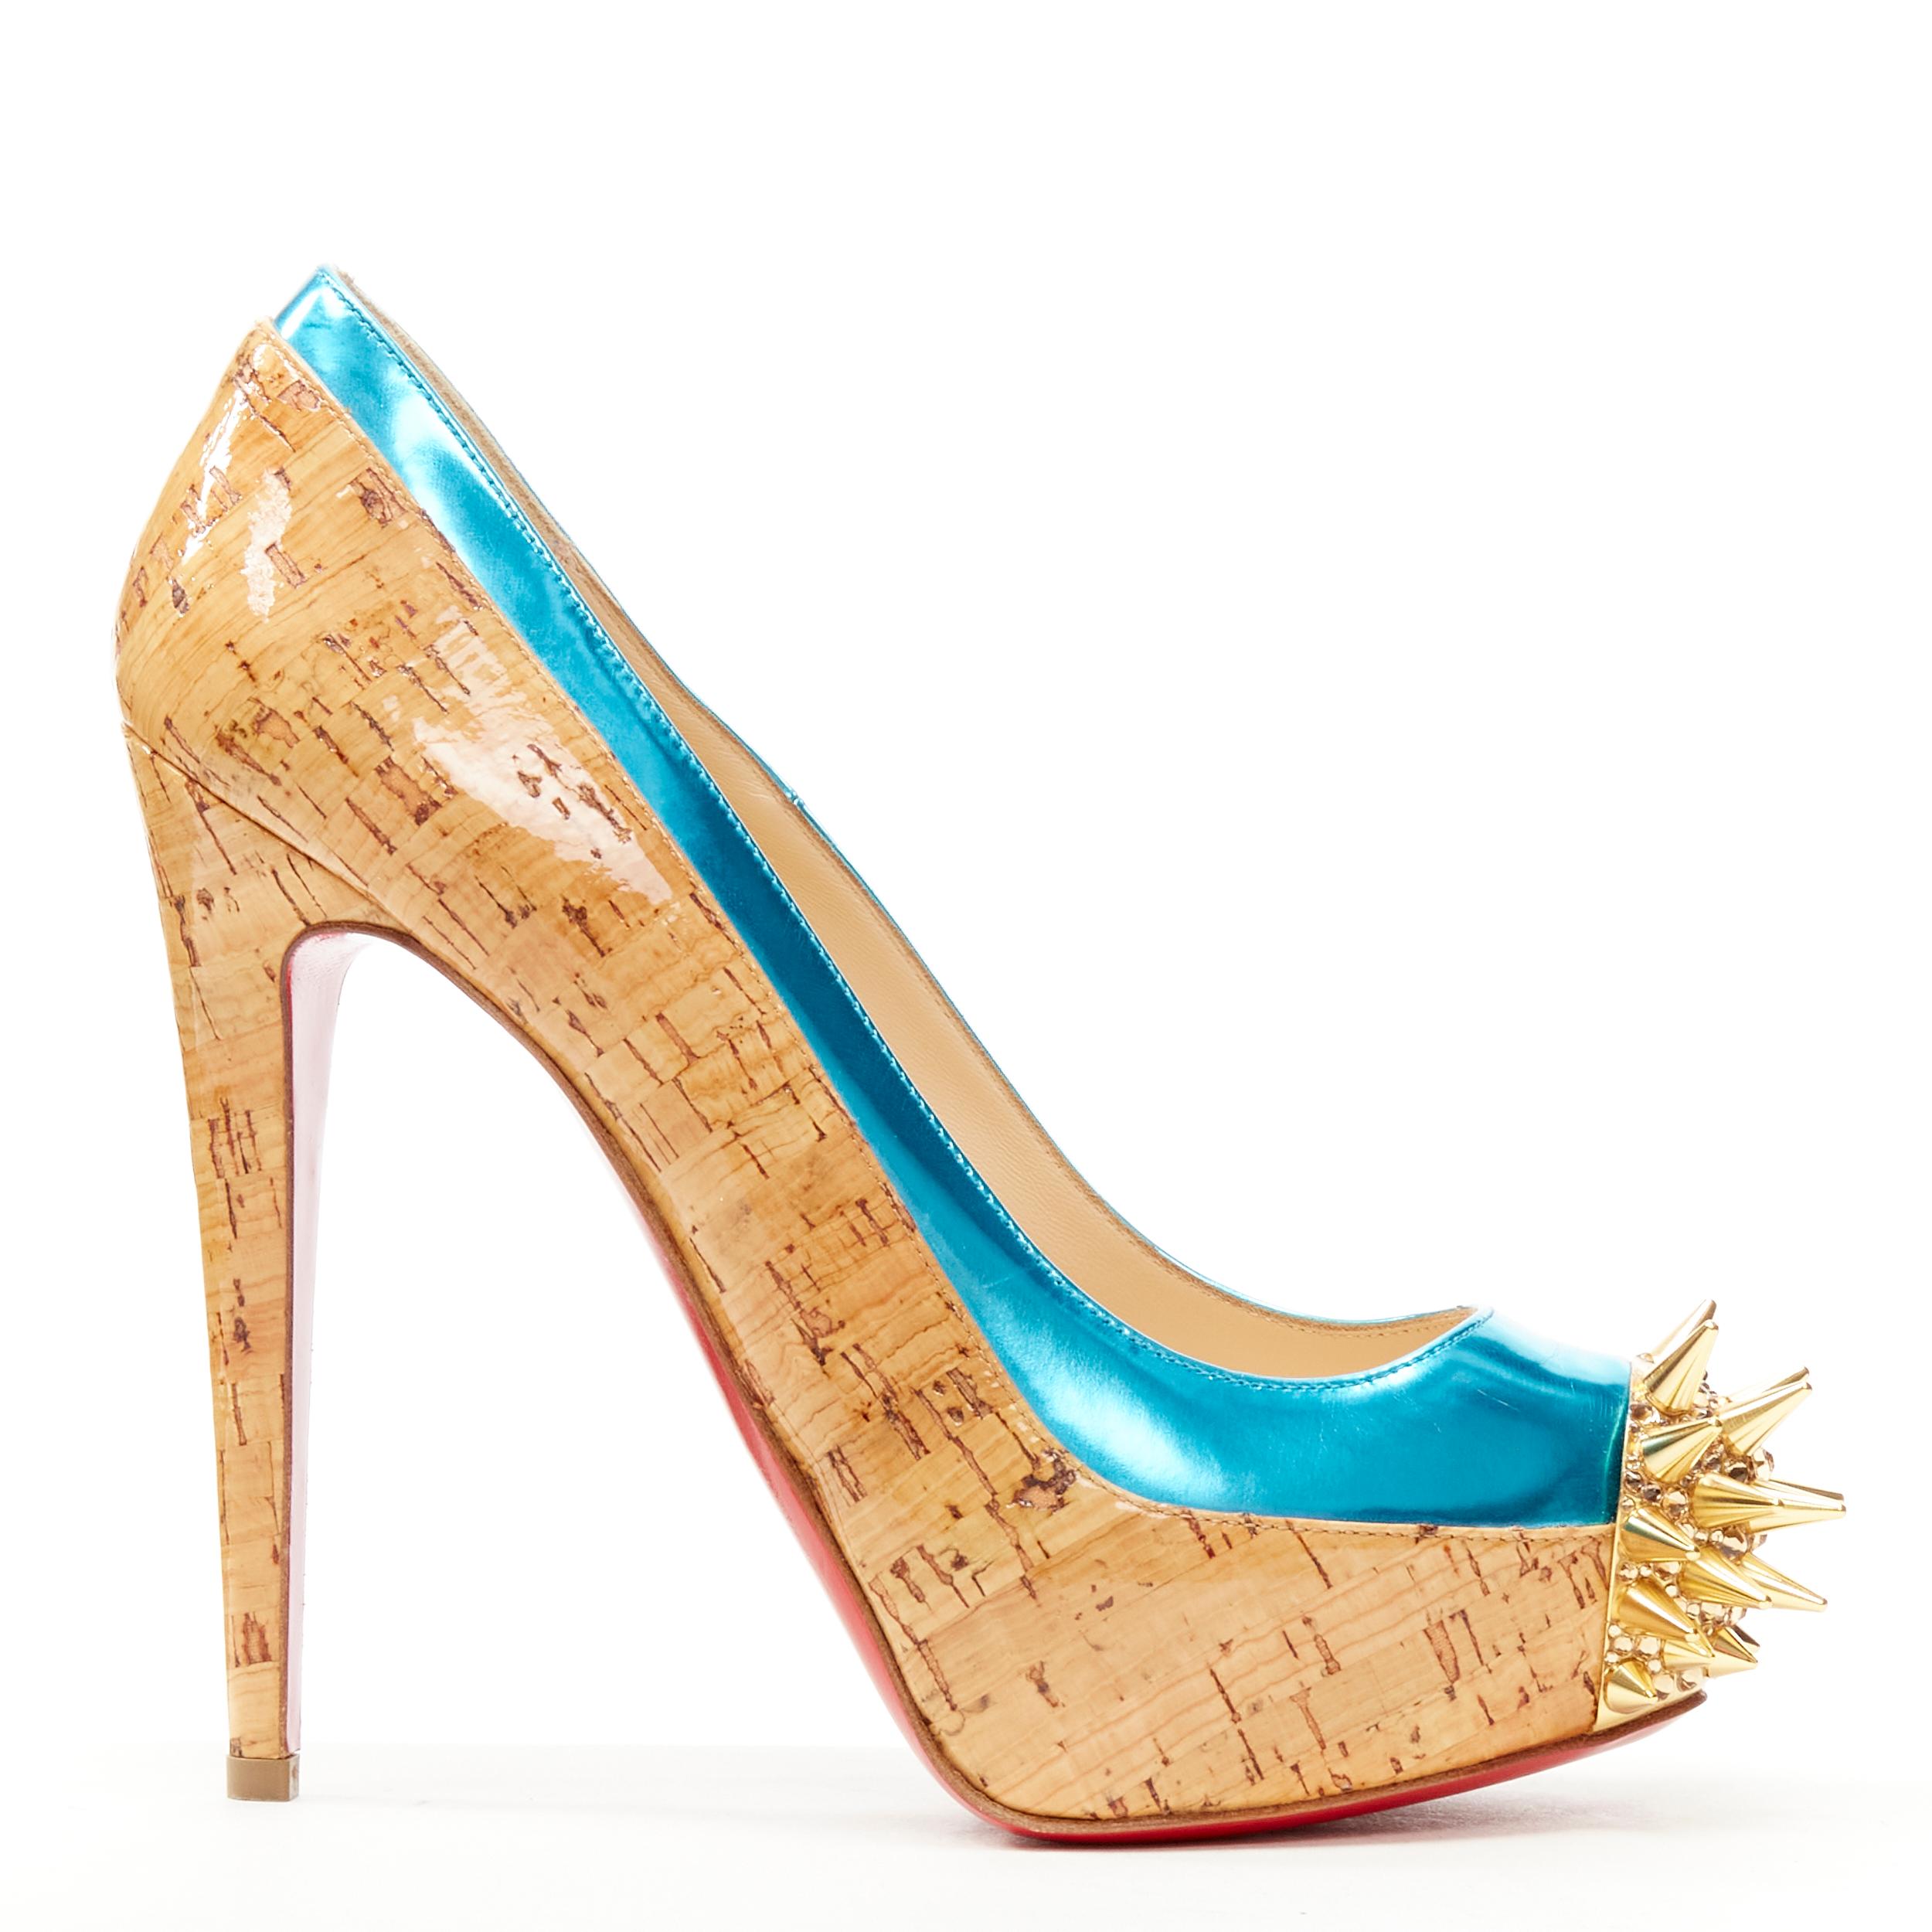 new CHRISTIAN LOUBOUTIN lacquered brown cork blue strass spike platform EU36.5 
Reference: TGAS/C01056 
Brand: Christian Louboutin 
Designer: Christian Louboutin 
Material: Cork 
Color: Brown 
Pattern: Solid 
Extra Detail: Lacquered cork and